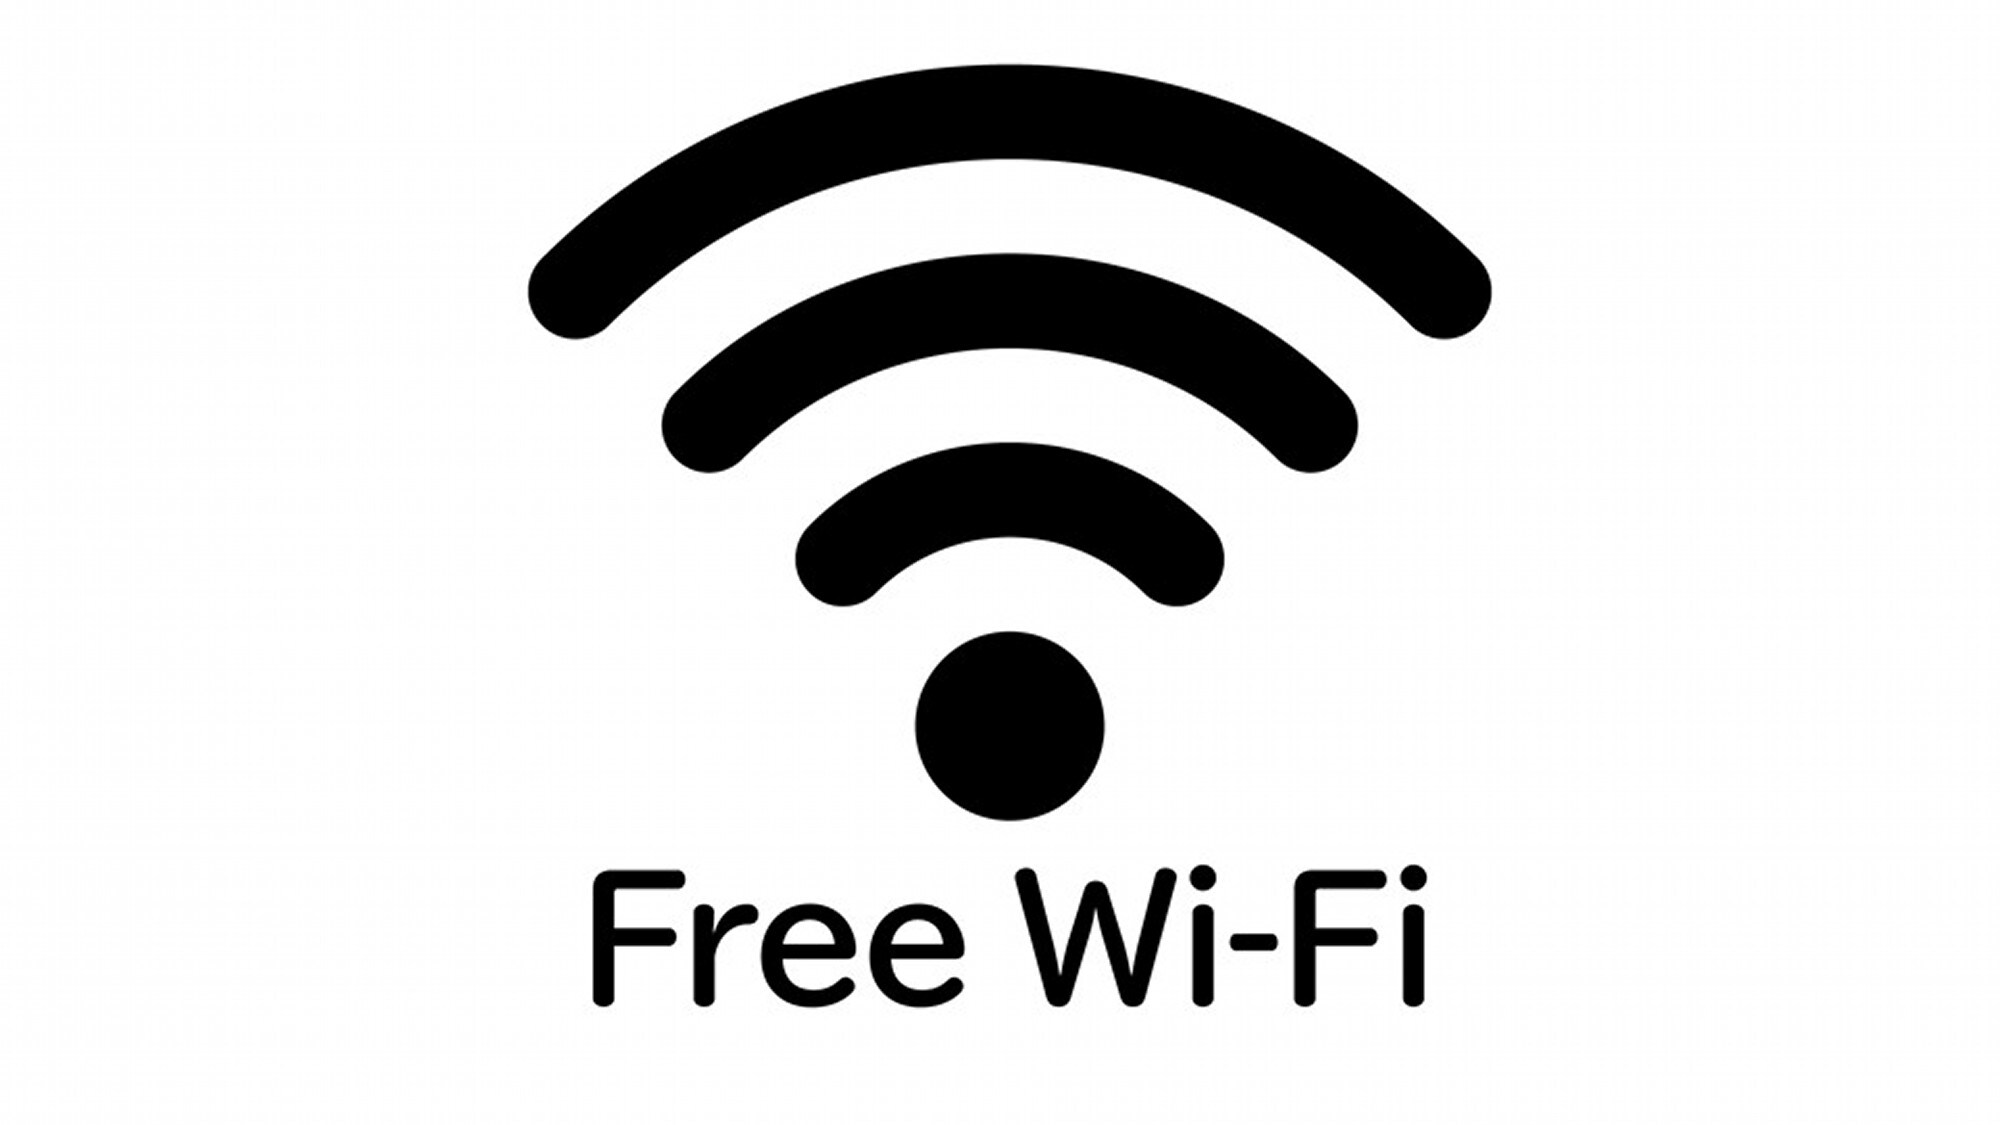 Free wi-fi * Wired LAN is also available.